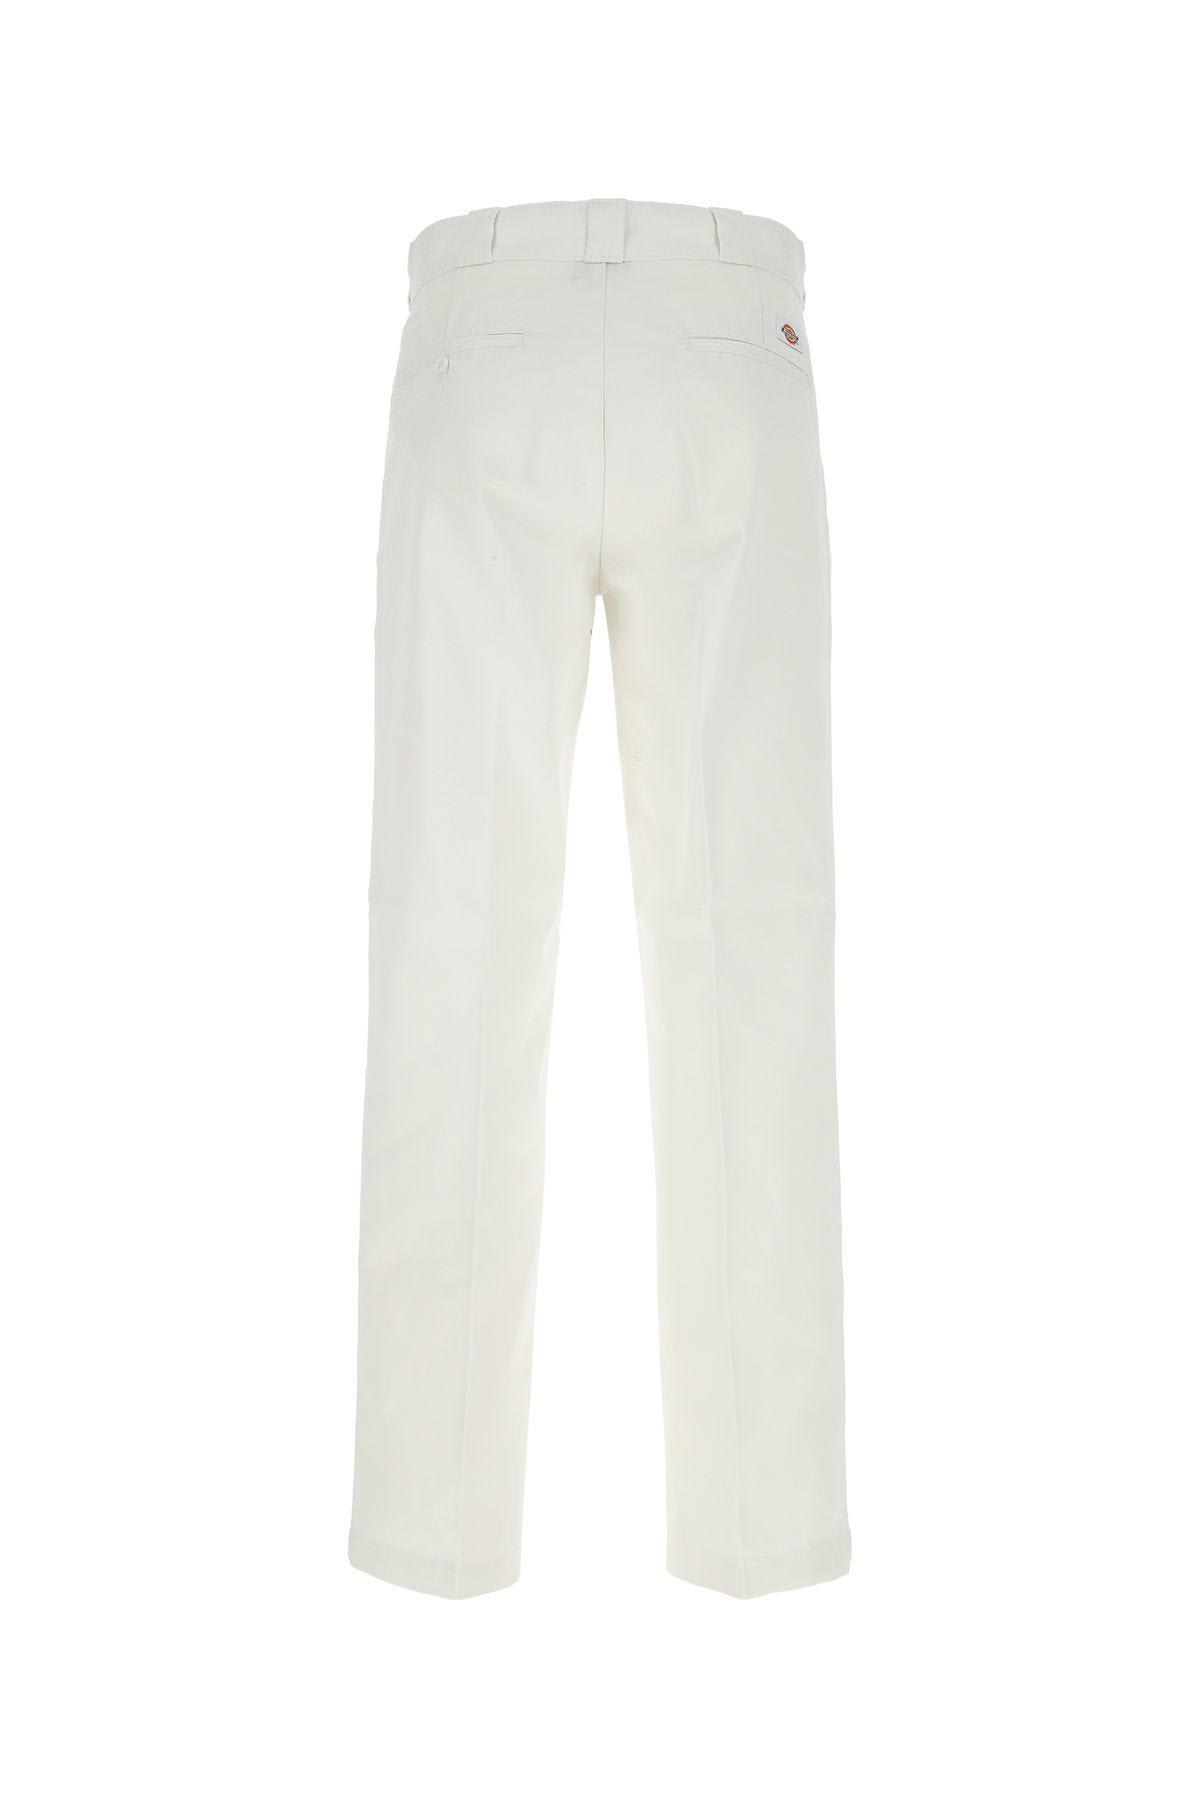 Shop Dickies White Polyester Blend Pant